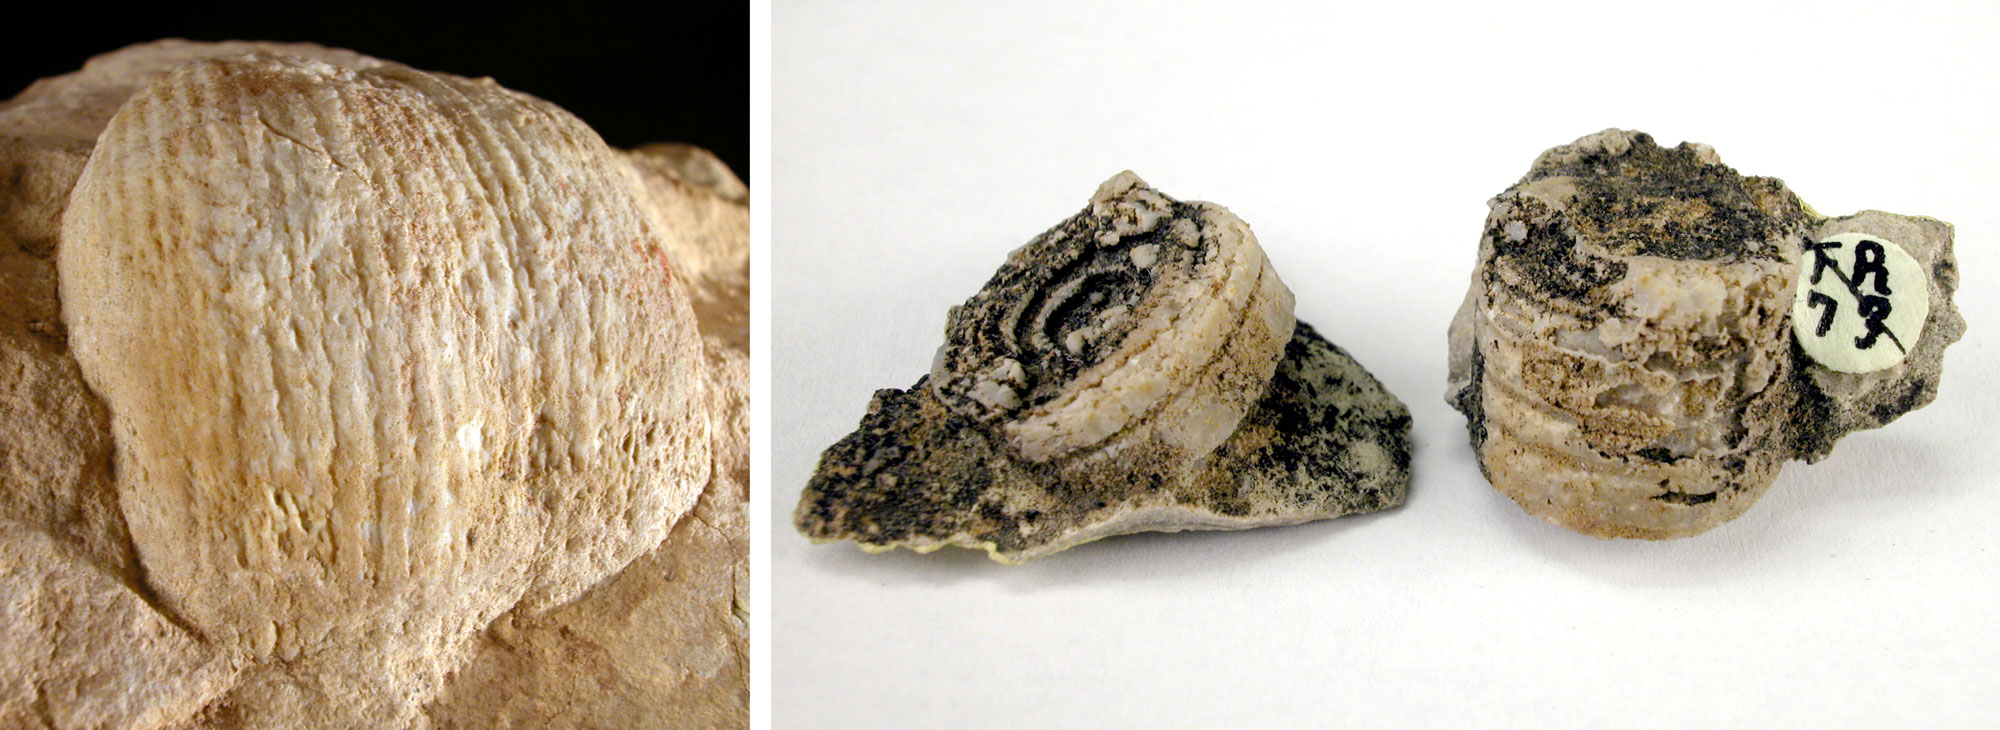 2-panel figure showing photos of fossil marine invertebrates from the Mississippian Kaibab Formation, Grand Canyon. Panel 1: Photo fo a brachiopod; one striated valve (shell) can be seen. Panel 2: Portions of crinoid stalks; each partial stalk is made up of several ring-shaped segments stacked on top of each other.